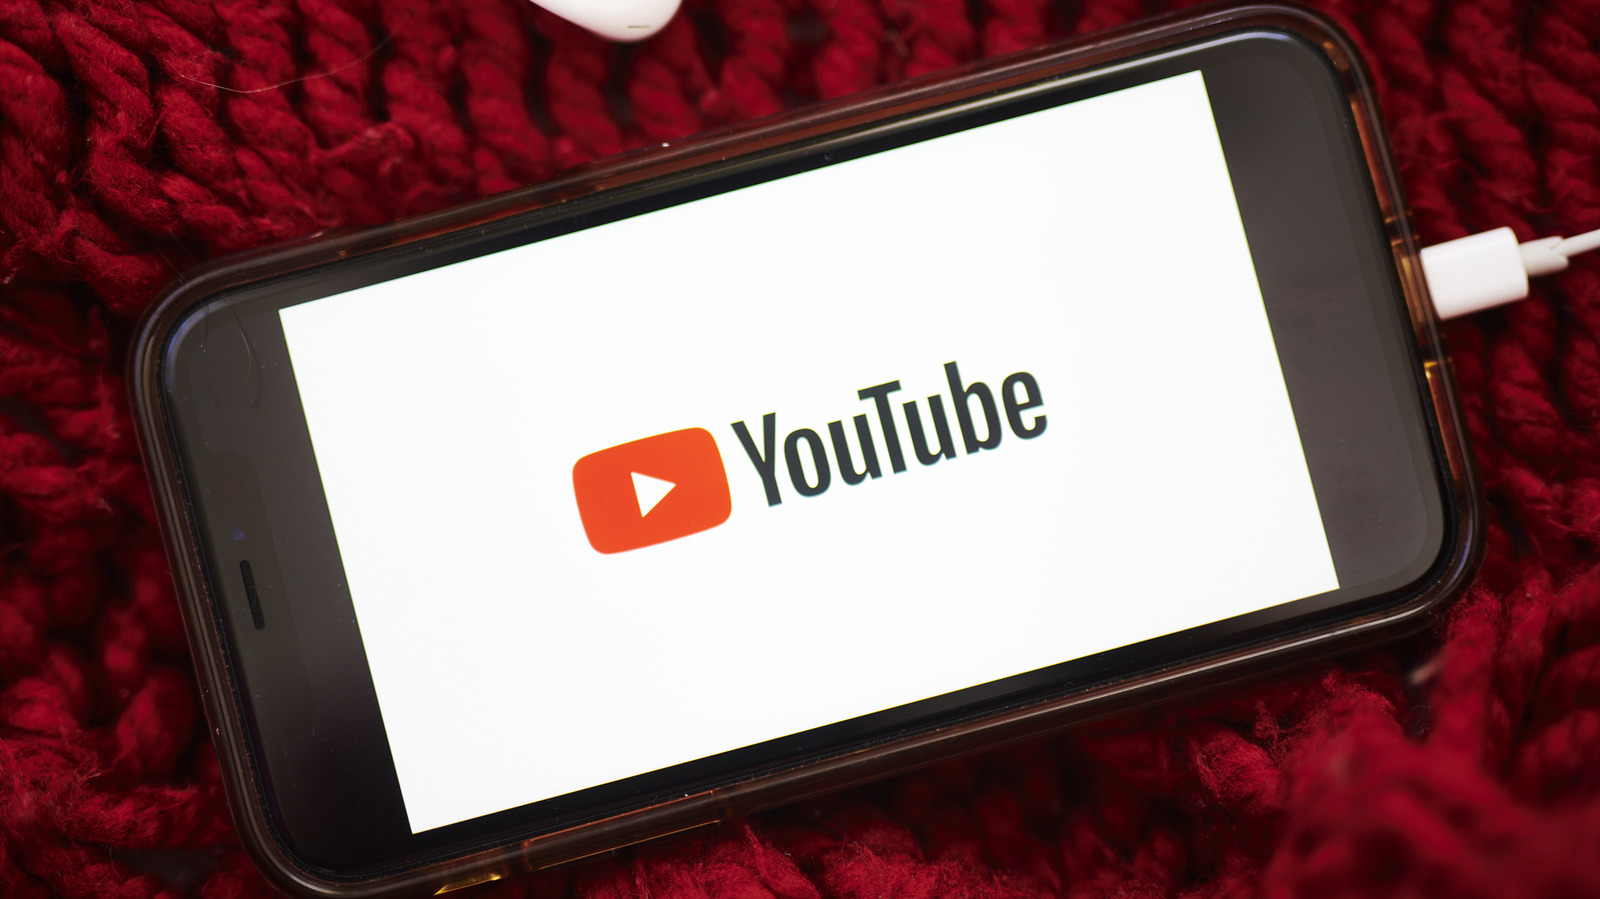 YouTube Reveals Exciting Feature For iPhone And iPad